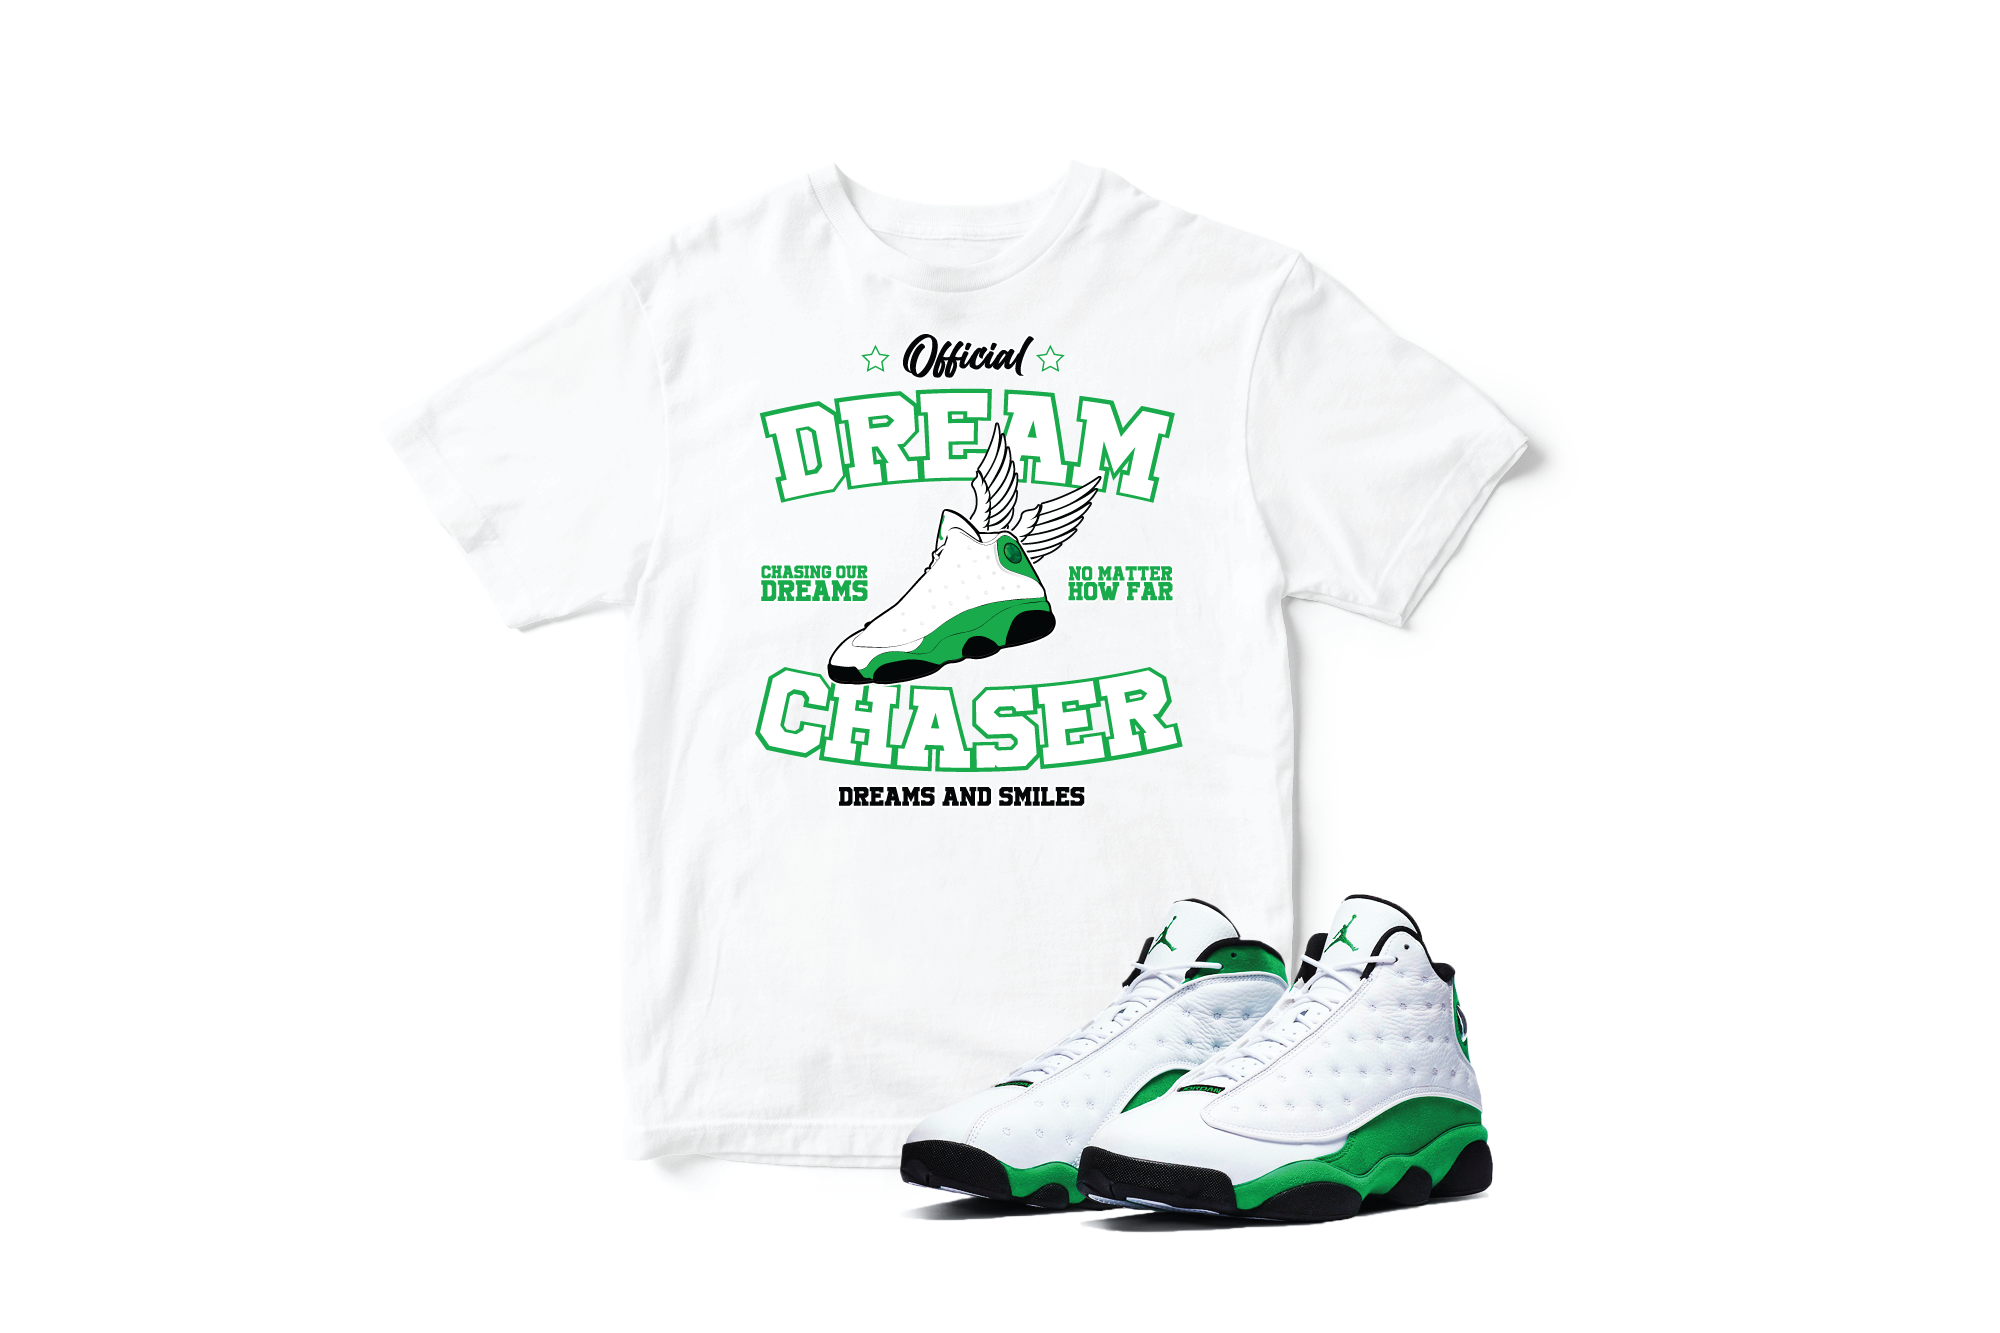 Official Dream Chaser' Custom Graphic 